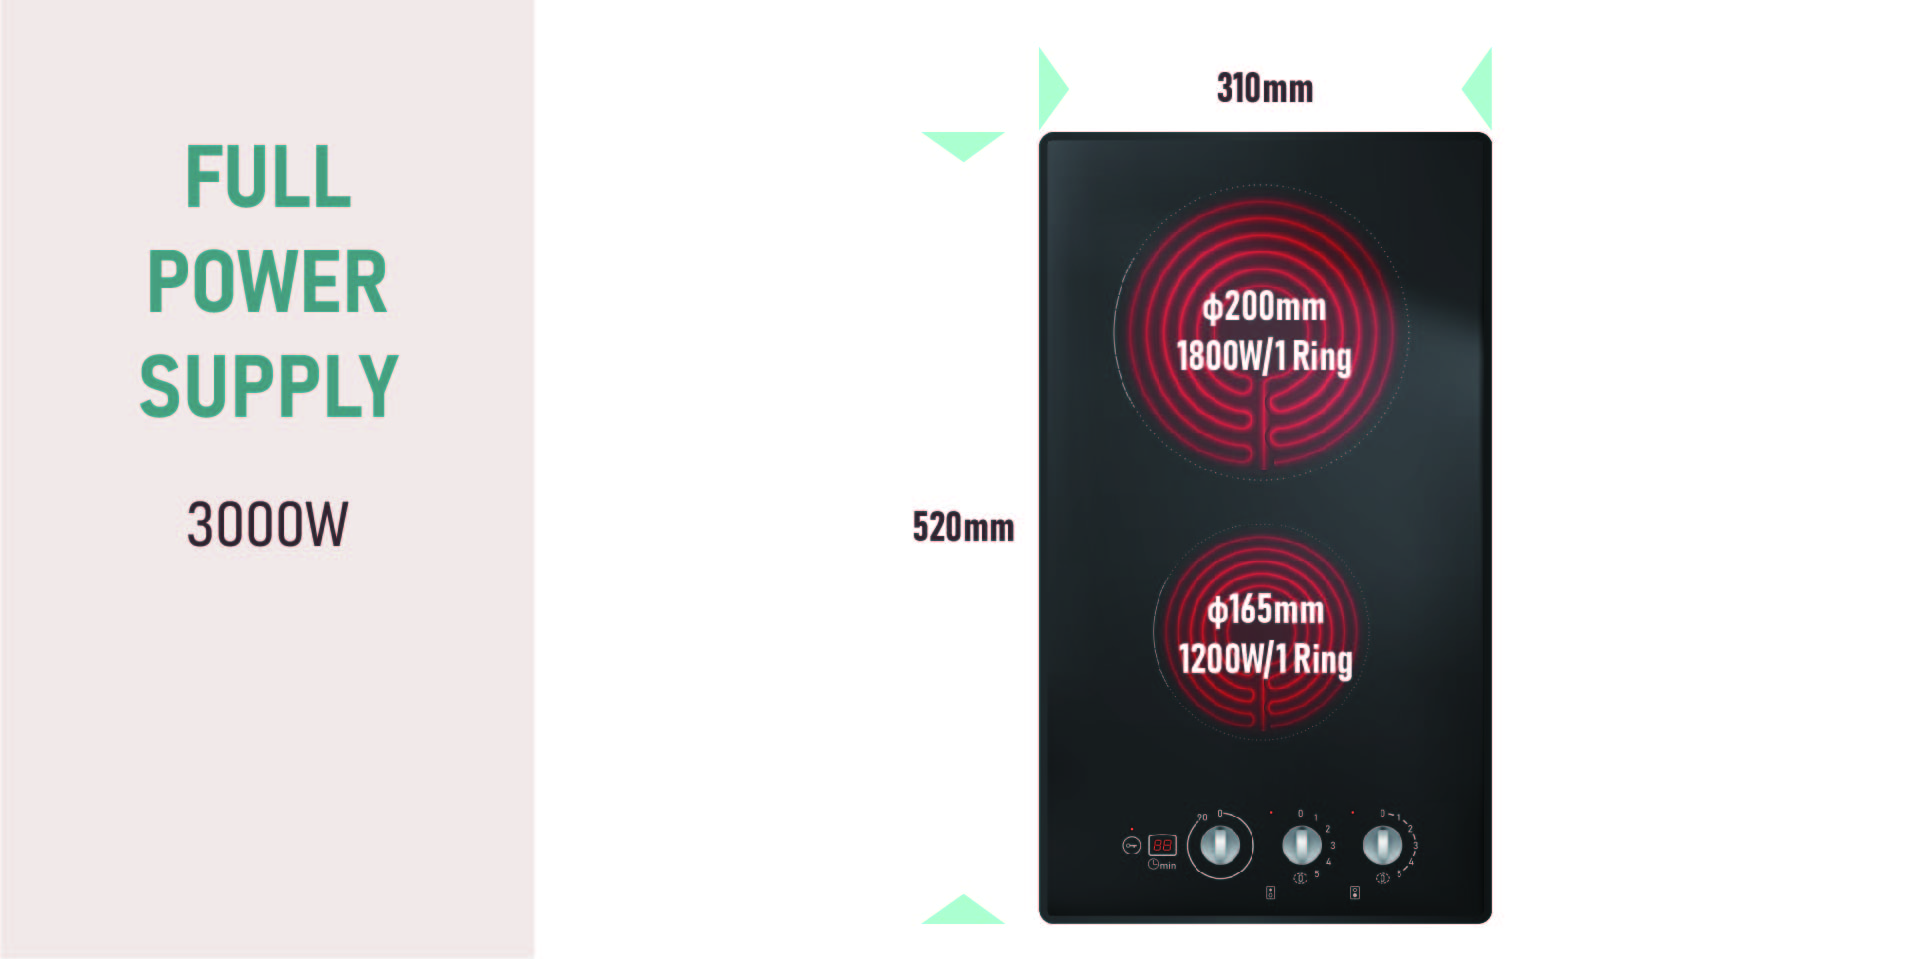 Quality 220-240V Built-in 2 Burner Electric Cooktop with Knob Control 3000W Hard Wired No Plug Manufacturer | H-one